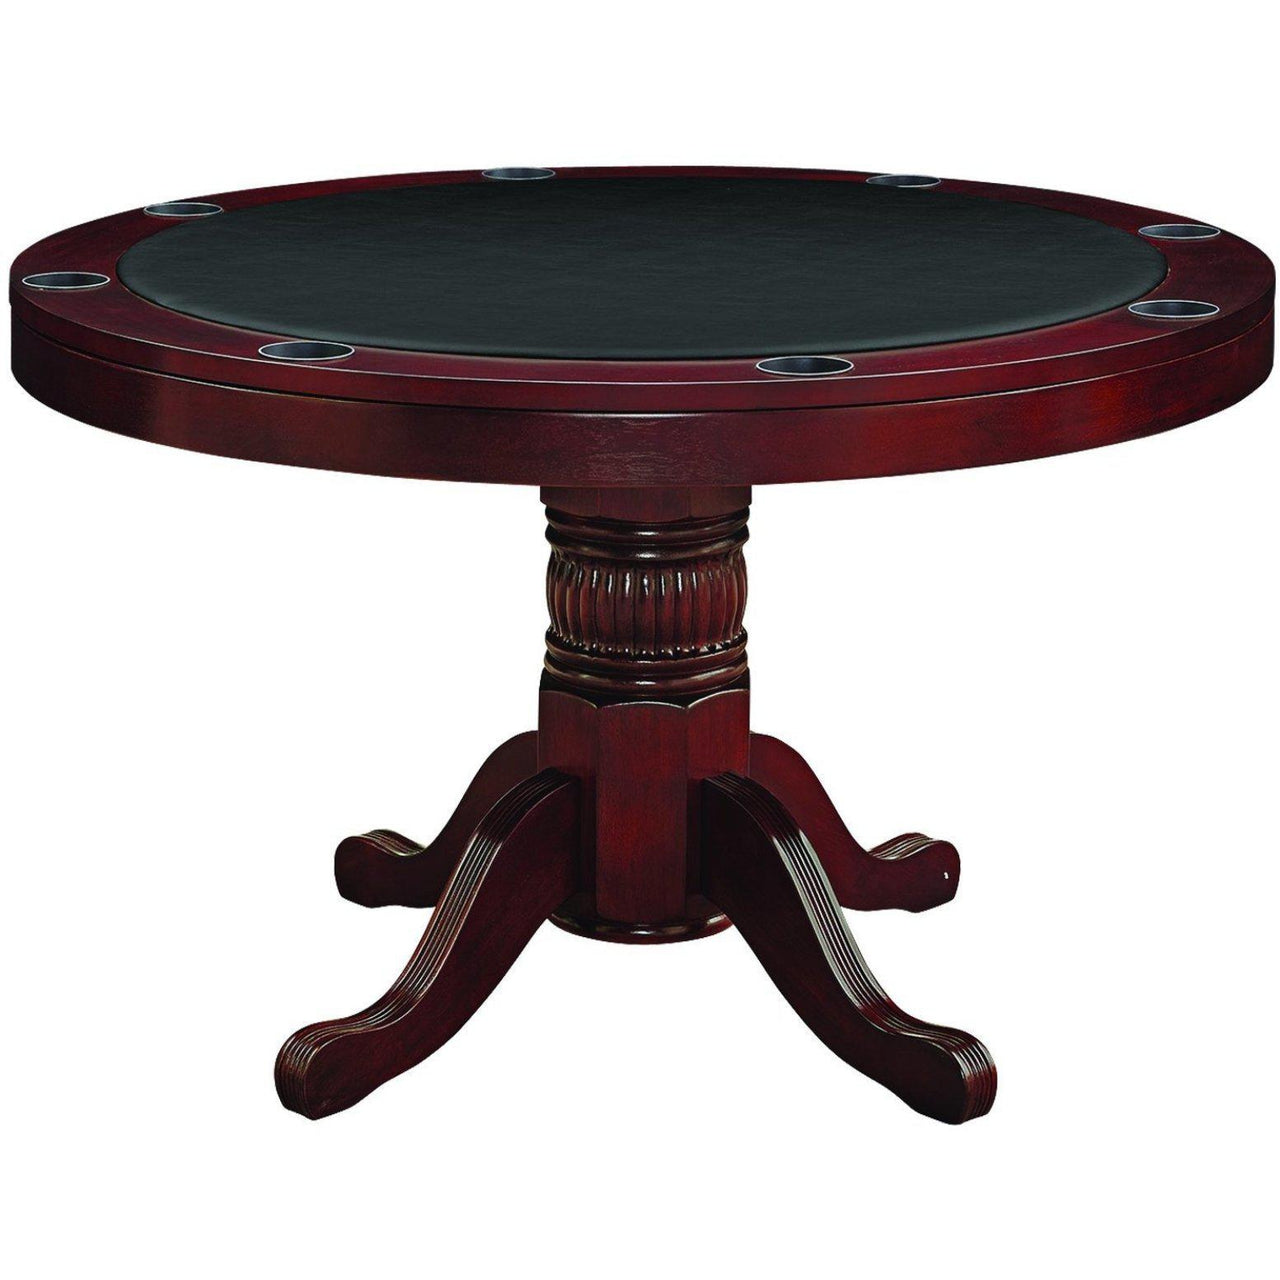 Convertible Round Poker & Dining Table with Convenient Storage, 48'', by RAM Game Room-AMERICANA-POKER-TABLES